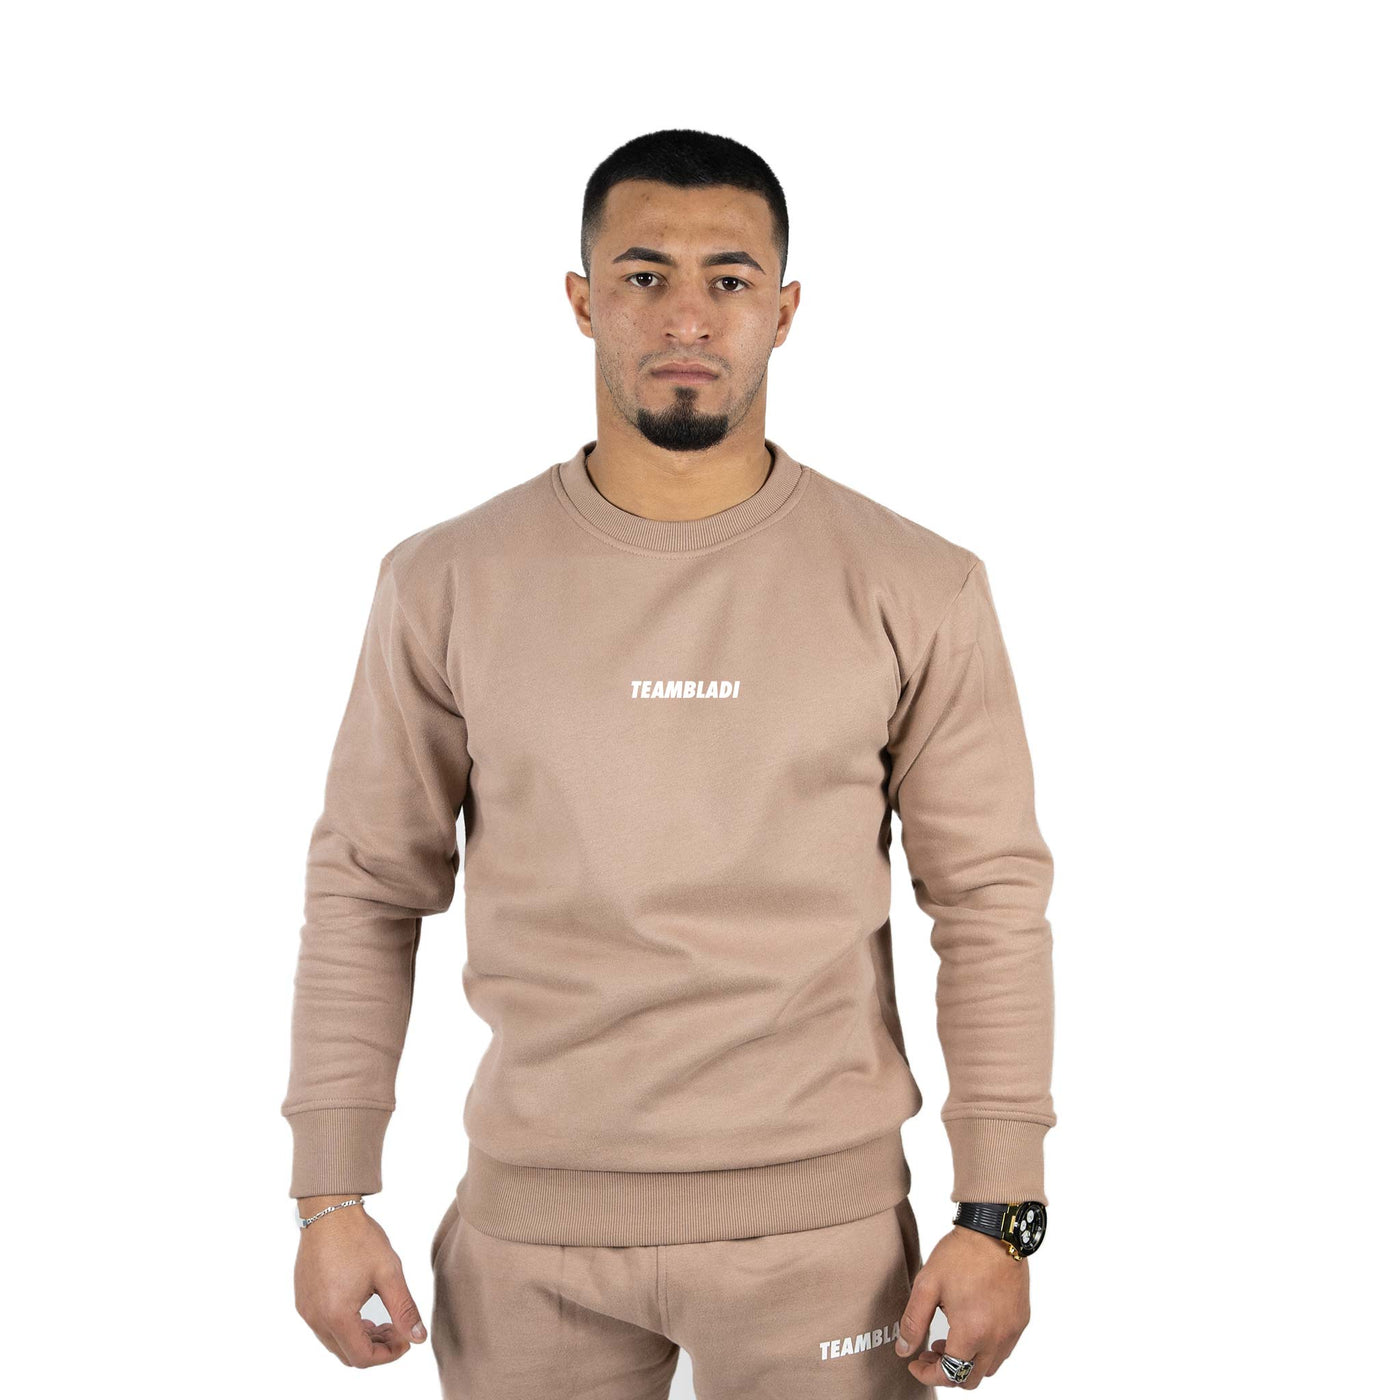 Essential Sweater Taupe